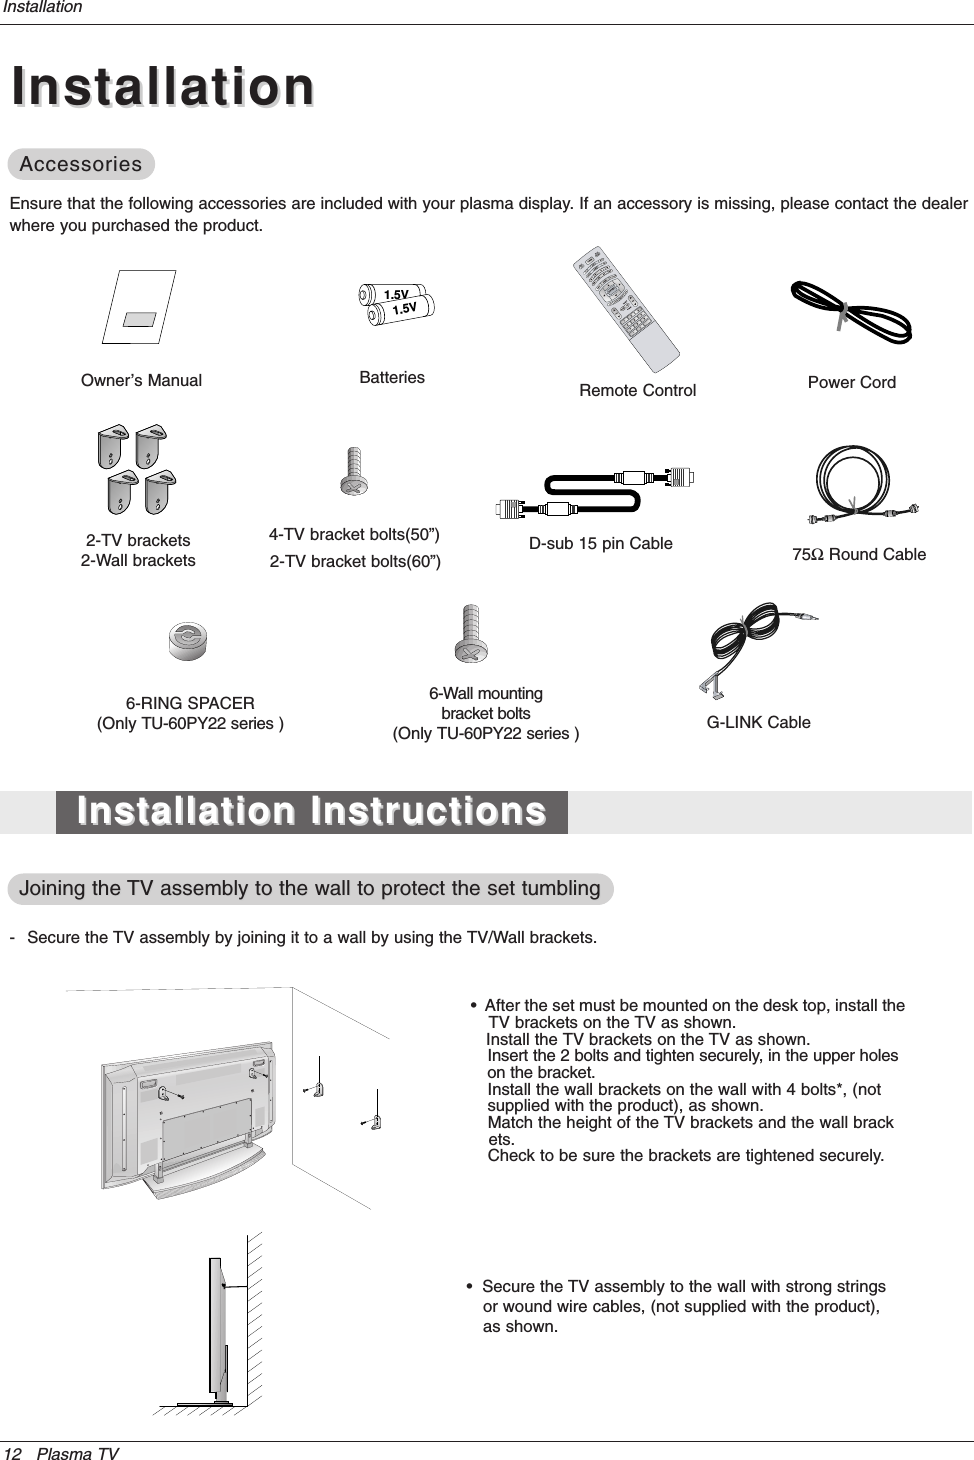 12 Plasma TVInstallationInstallationInstallationOwner’s Manual1.5V1.5VBatteries Power CordMODEDAY -DAY +FLASHBKAPMCCAUTO DEMOTV INPUT75ΩRound CableEnsure that the following accessories are included with your plasma display. If an accessory is missing, please contact the dealerwhere you purchased the product.2-TV brackets2-Wall brackets4-TV bracket bolts(50”)G-LINK Cable2-TV bracket bolts(60”)Remote ControlInstallation InstructionsInstallation InstructionsAccessoriesAccessories- Secure the TV assembly by joining it to a wall by using the TV/Wall brackets.Joining the Joining the TV assembly to the wall to protect the set tumblingTV assembly to the wall to protect the set tumbling•  After the set must be mounted on the desk top, install theTV brackets on the TV as shown.Install the TV brackets on the TV as shown.Insert the 2 bolts and tighten securely, in the upper holeson the bracket. Install the wall brackets on the wall with 4 bolts*, (notsupplied with the product), as shown.Match the height of the TV brackets and the wall brack•ets. Check to be sure the brackets are tightened securely.•  Secure the TV assembly to the wall with strong strings•or wound wire cables, (not supplied with the product),•as shown.6-RING SPACER(Only TU-60PY22 series )6-Wall mounting bracket bolts(Only TU-60PY22 series )D-sub 15 pin Cable